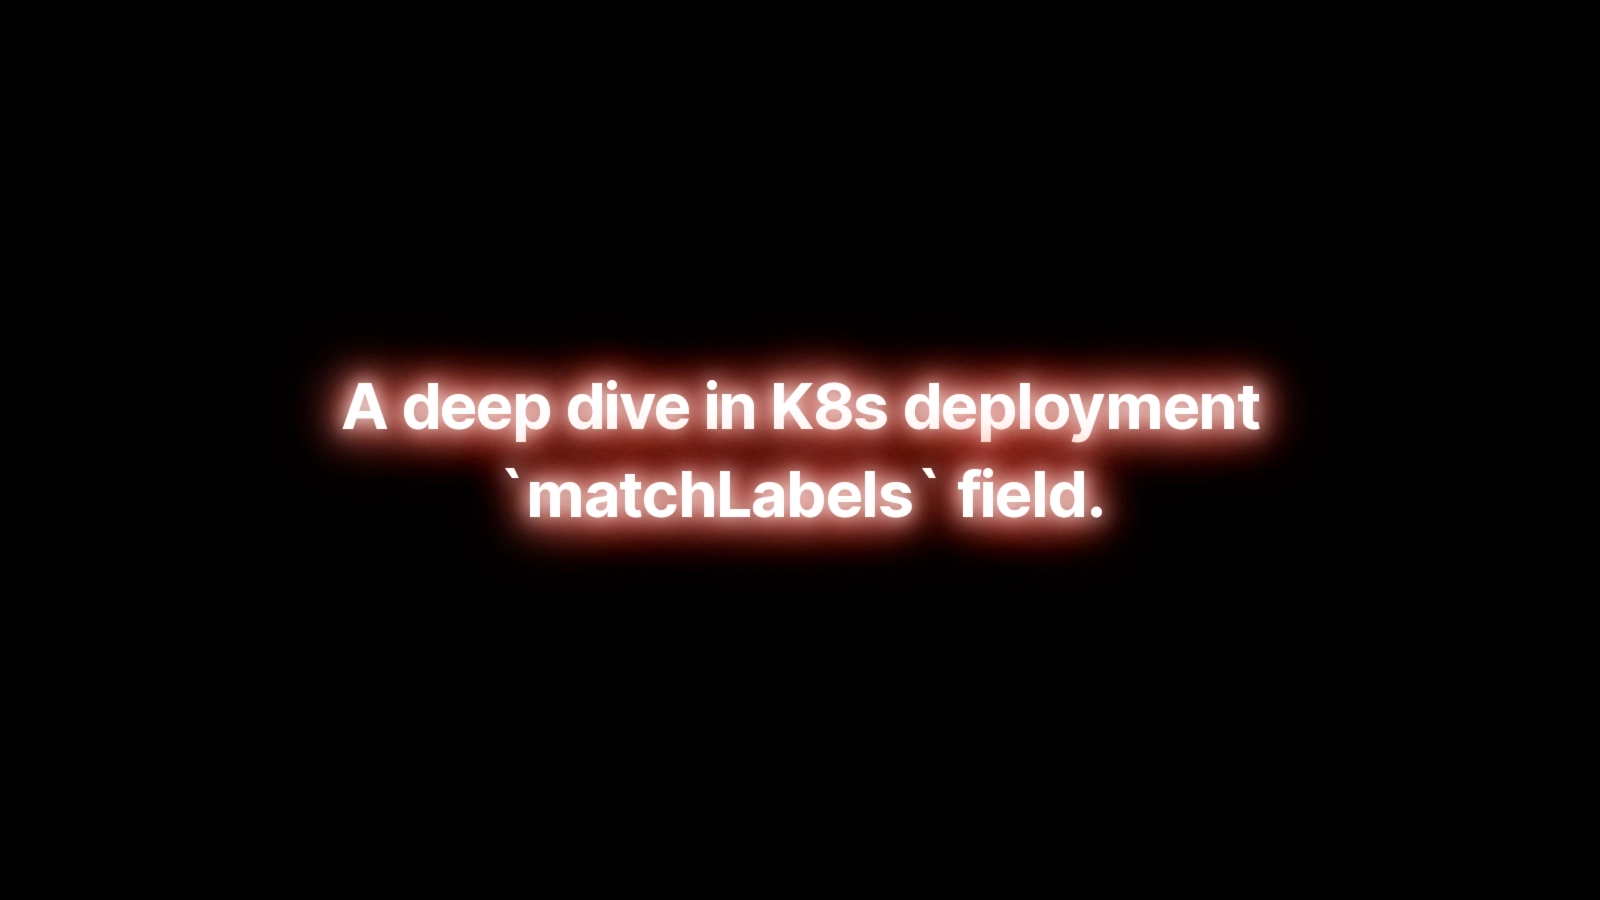 A deep dive in K8s deployment matchLabels field